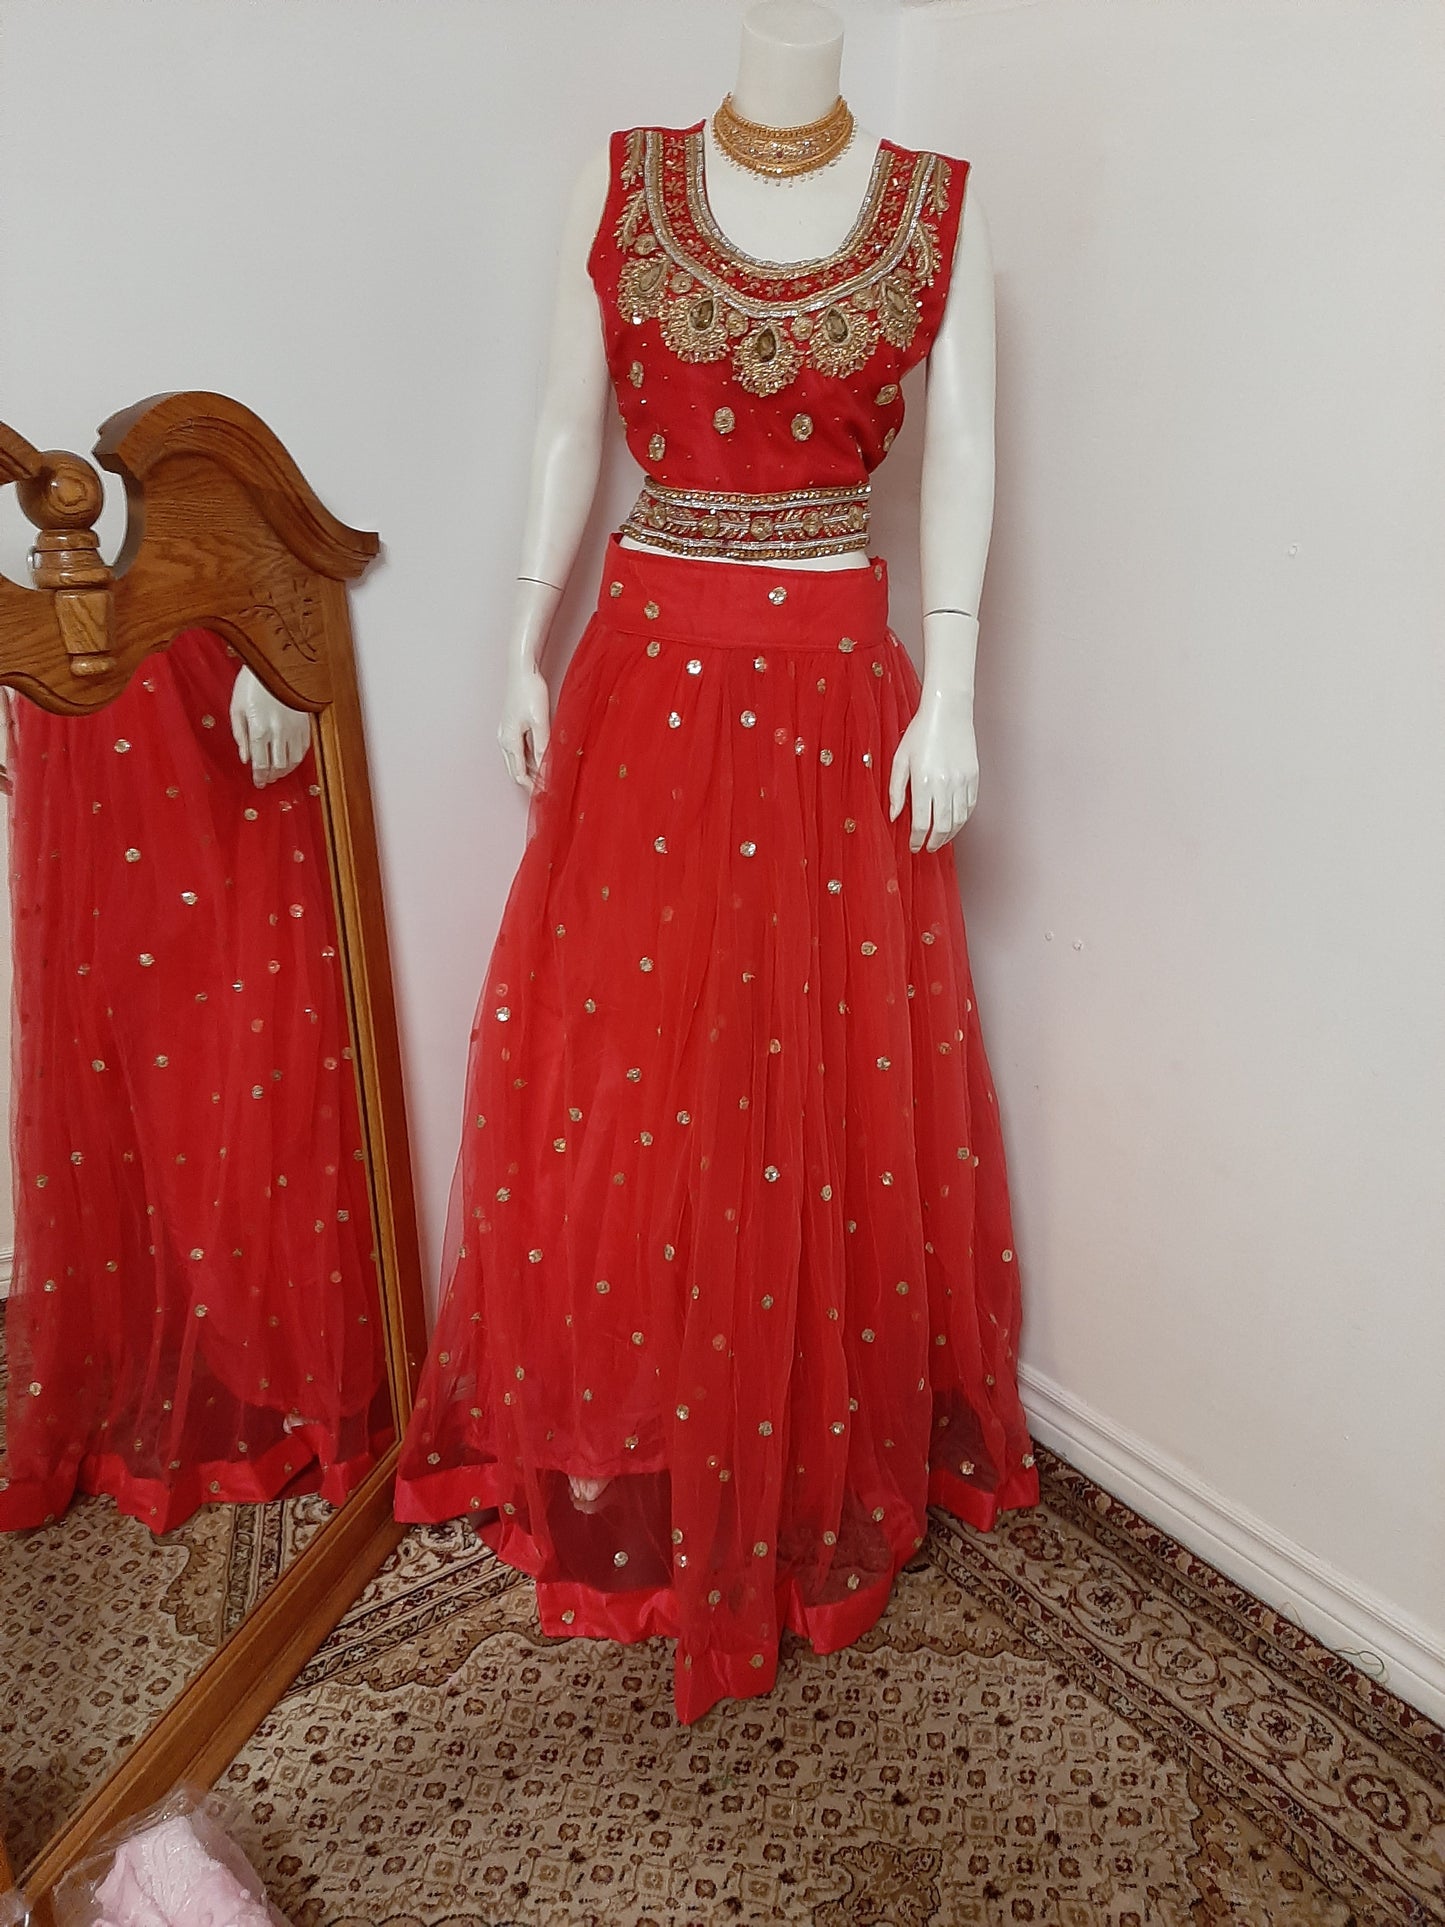 Red Lehenga with Red Blouse and Golden Dupatta @ DressingStylesCA.com